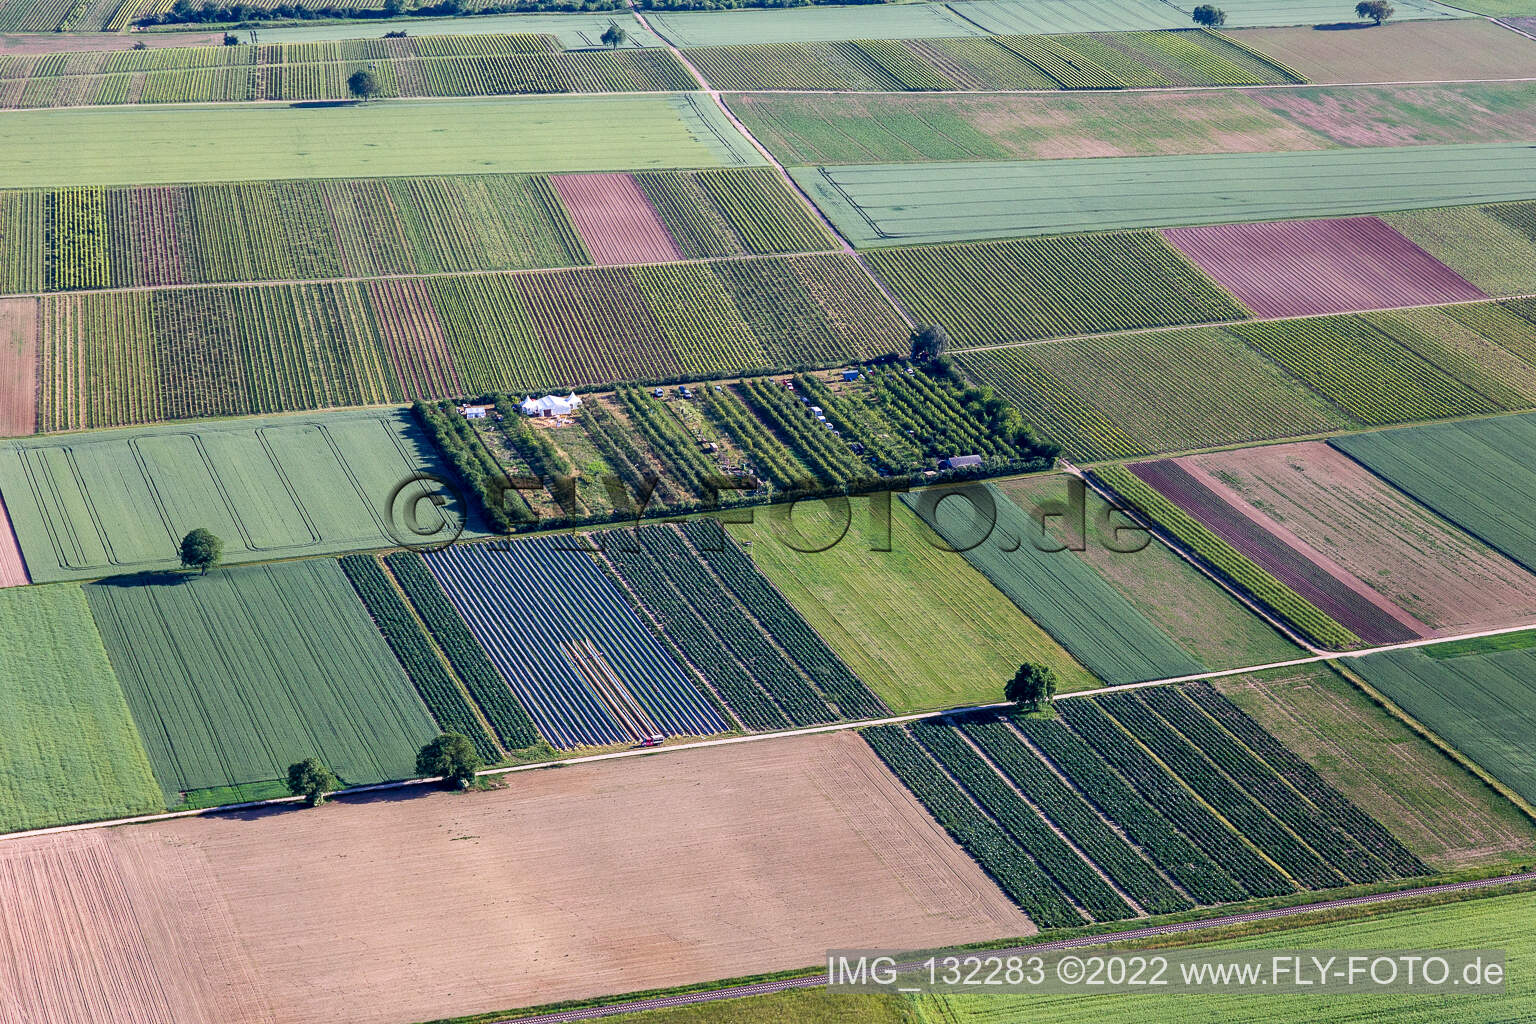 Aerial view of Orchard in the district Mühlhofen in Billigheim-Ingenheim in the state Rhineland-Palatinate, Germany